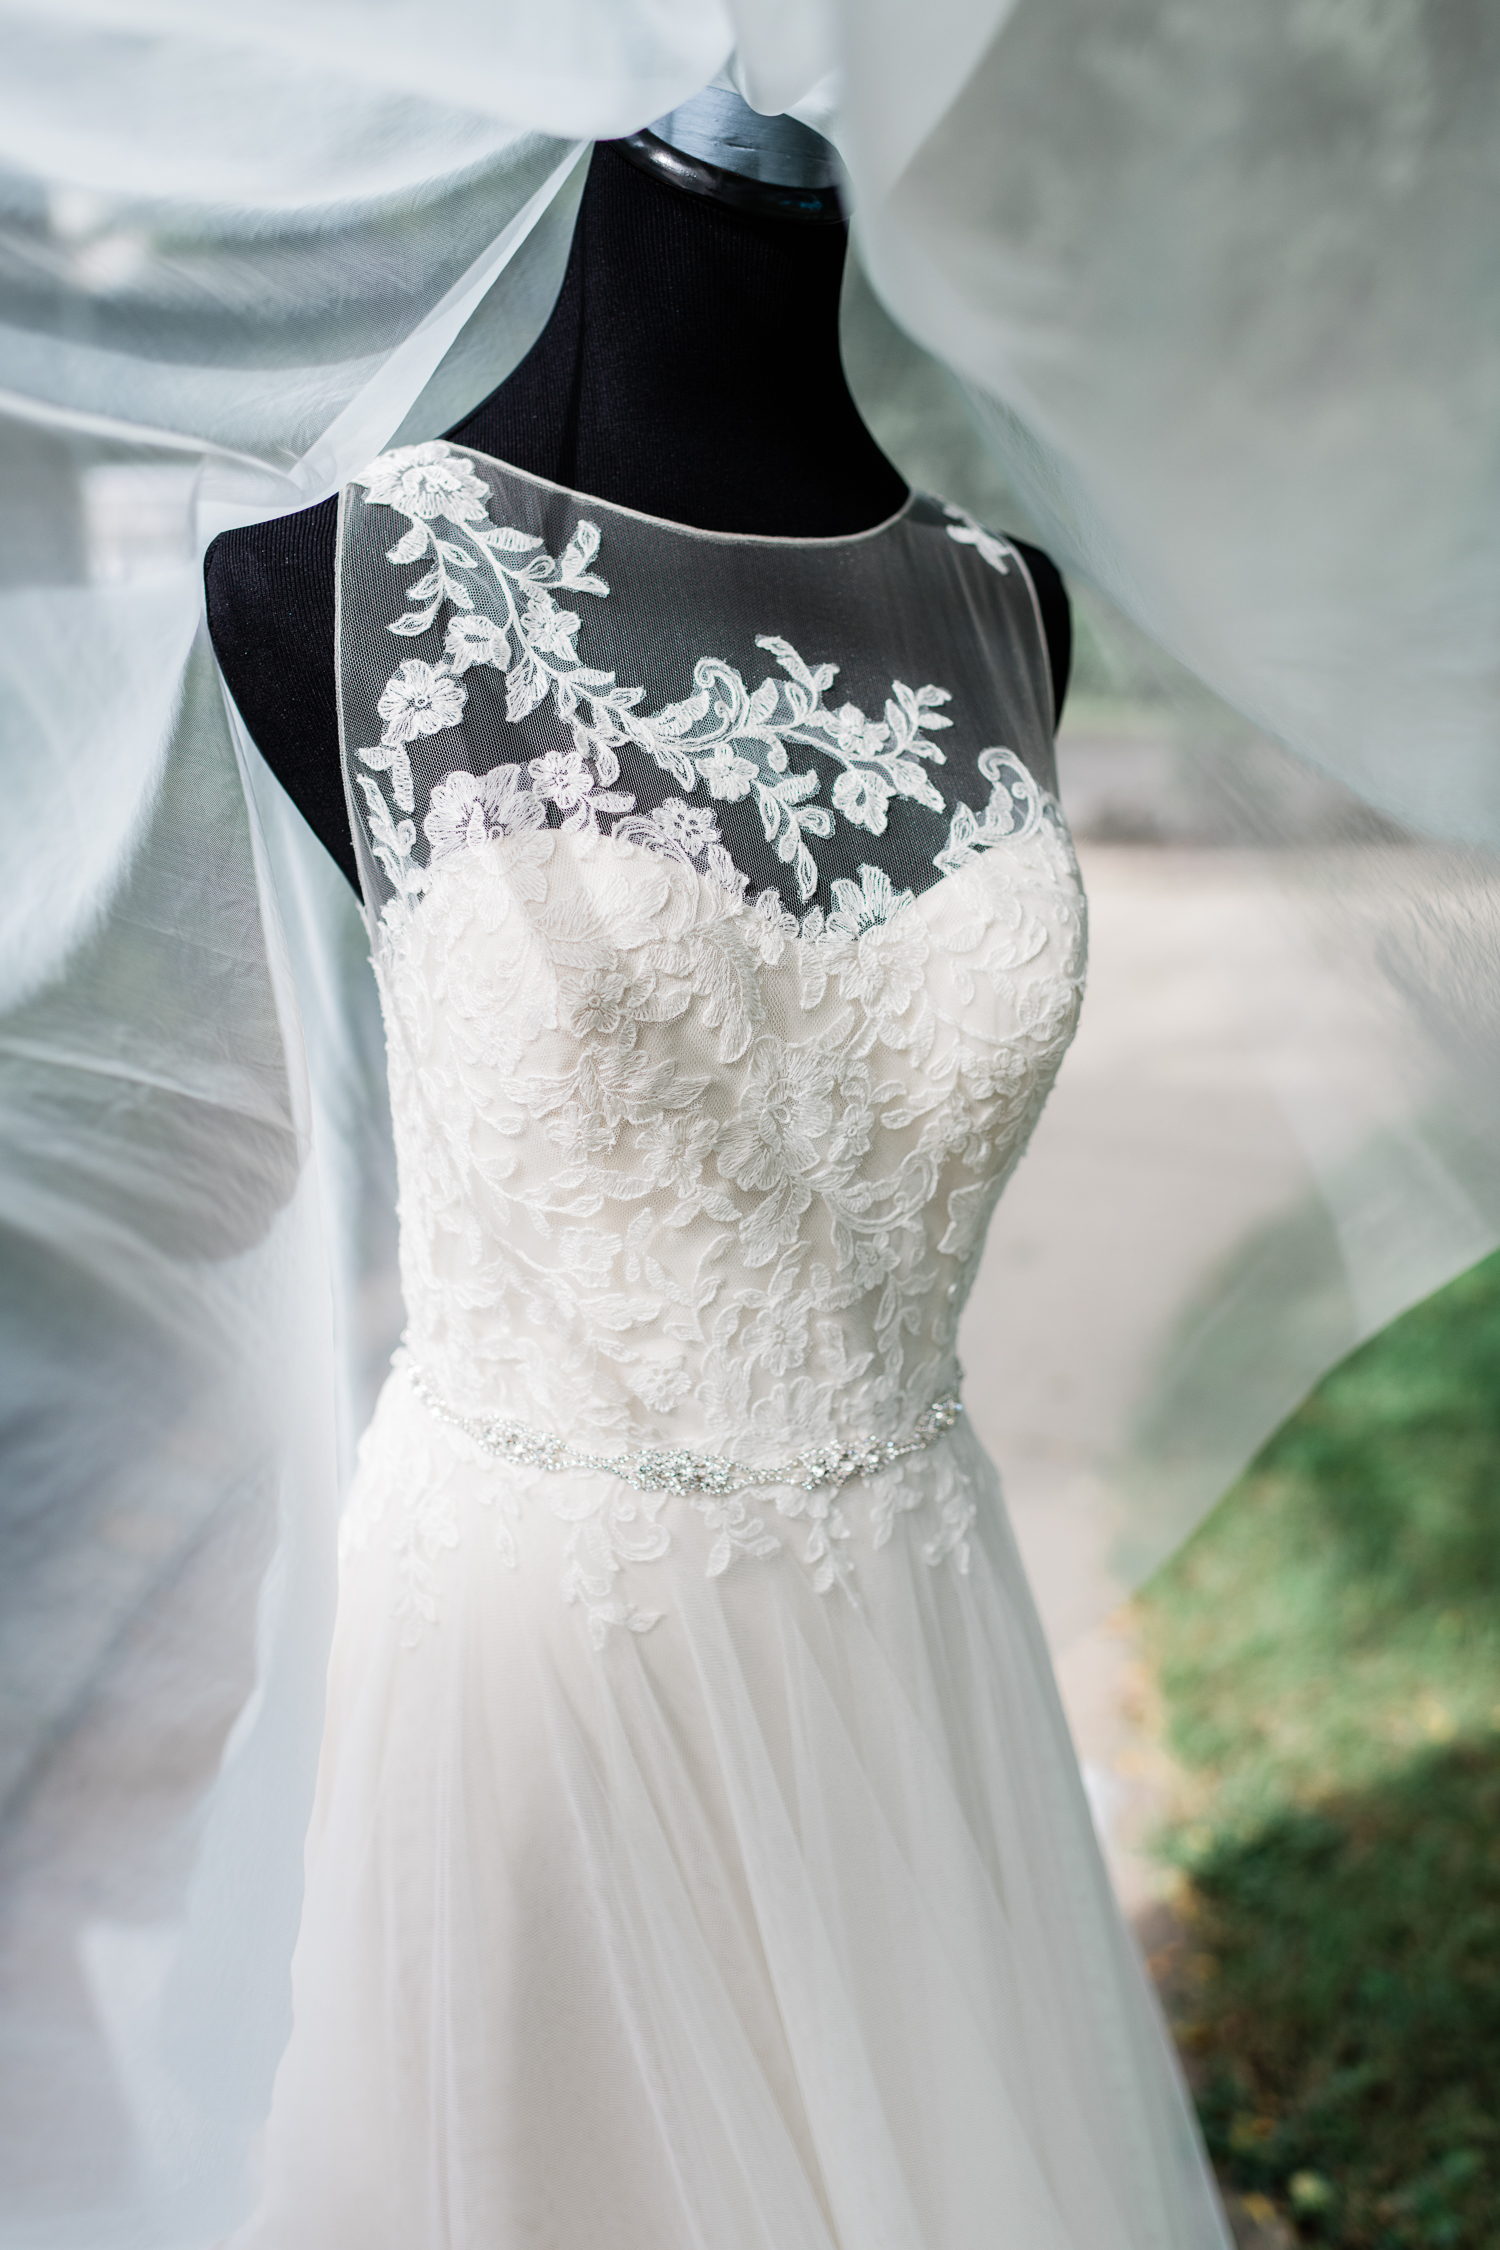 White lacey wedding dress and a veil